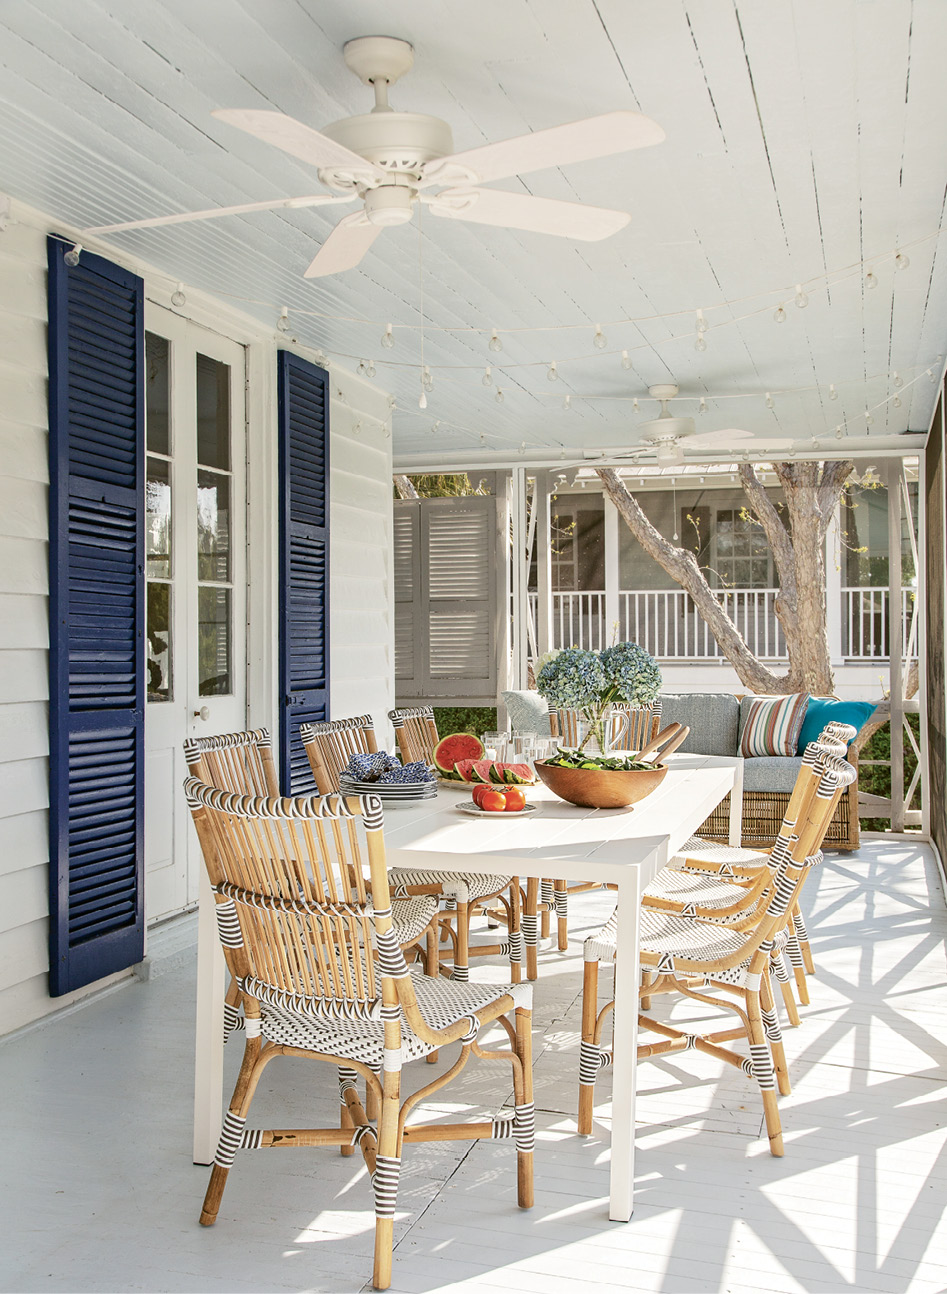 Its quintessential beachside charm—complete with an enormous porch perfect for entertaining—made it the ideal candidate to renovate rather than raze.